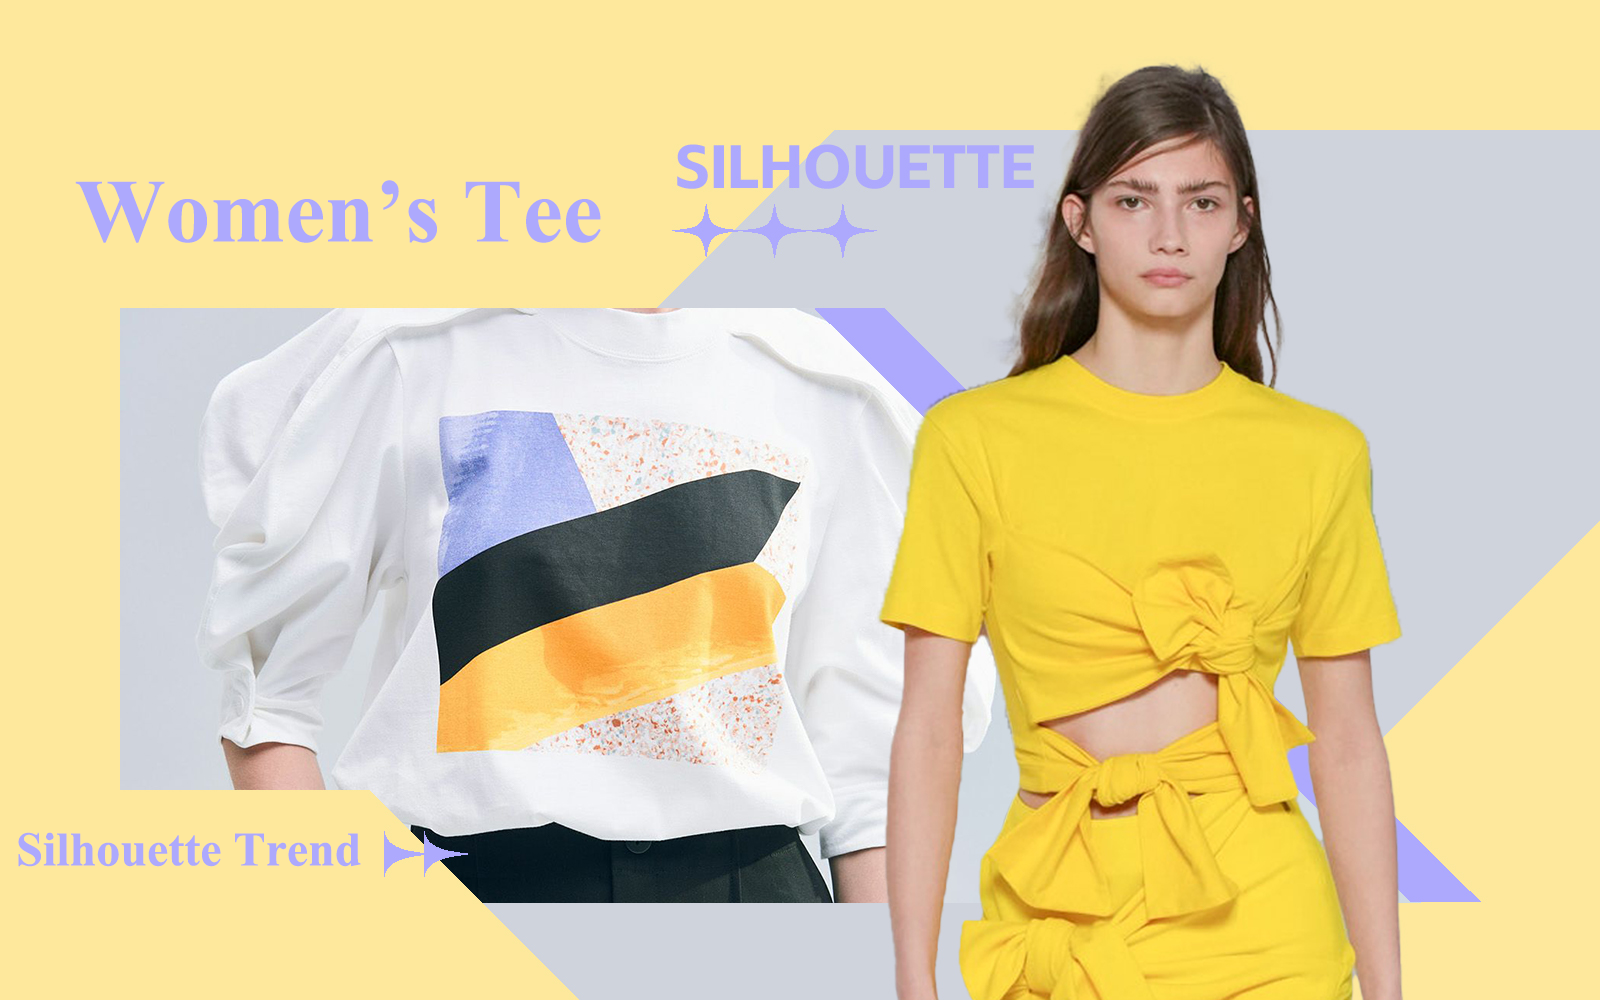 Sweet & Versatile -- The Silhouette Trend for Women's Tee